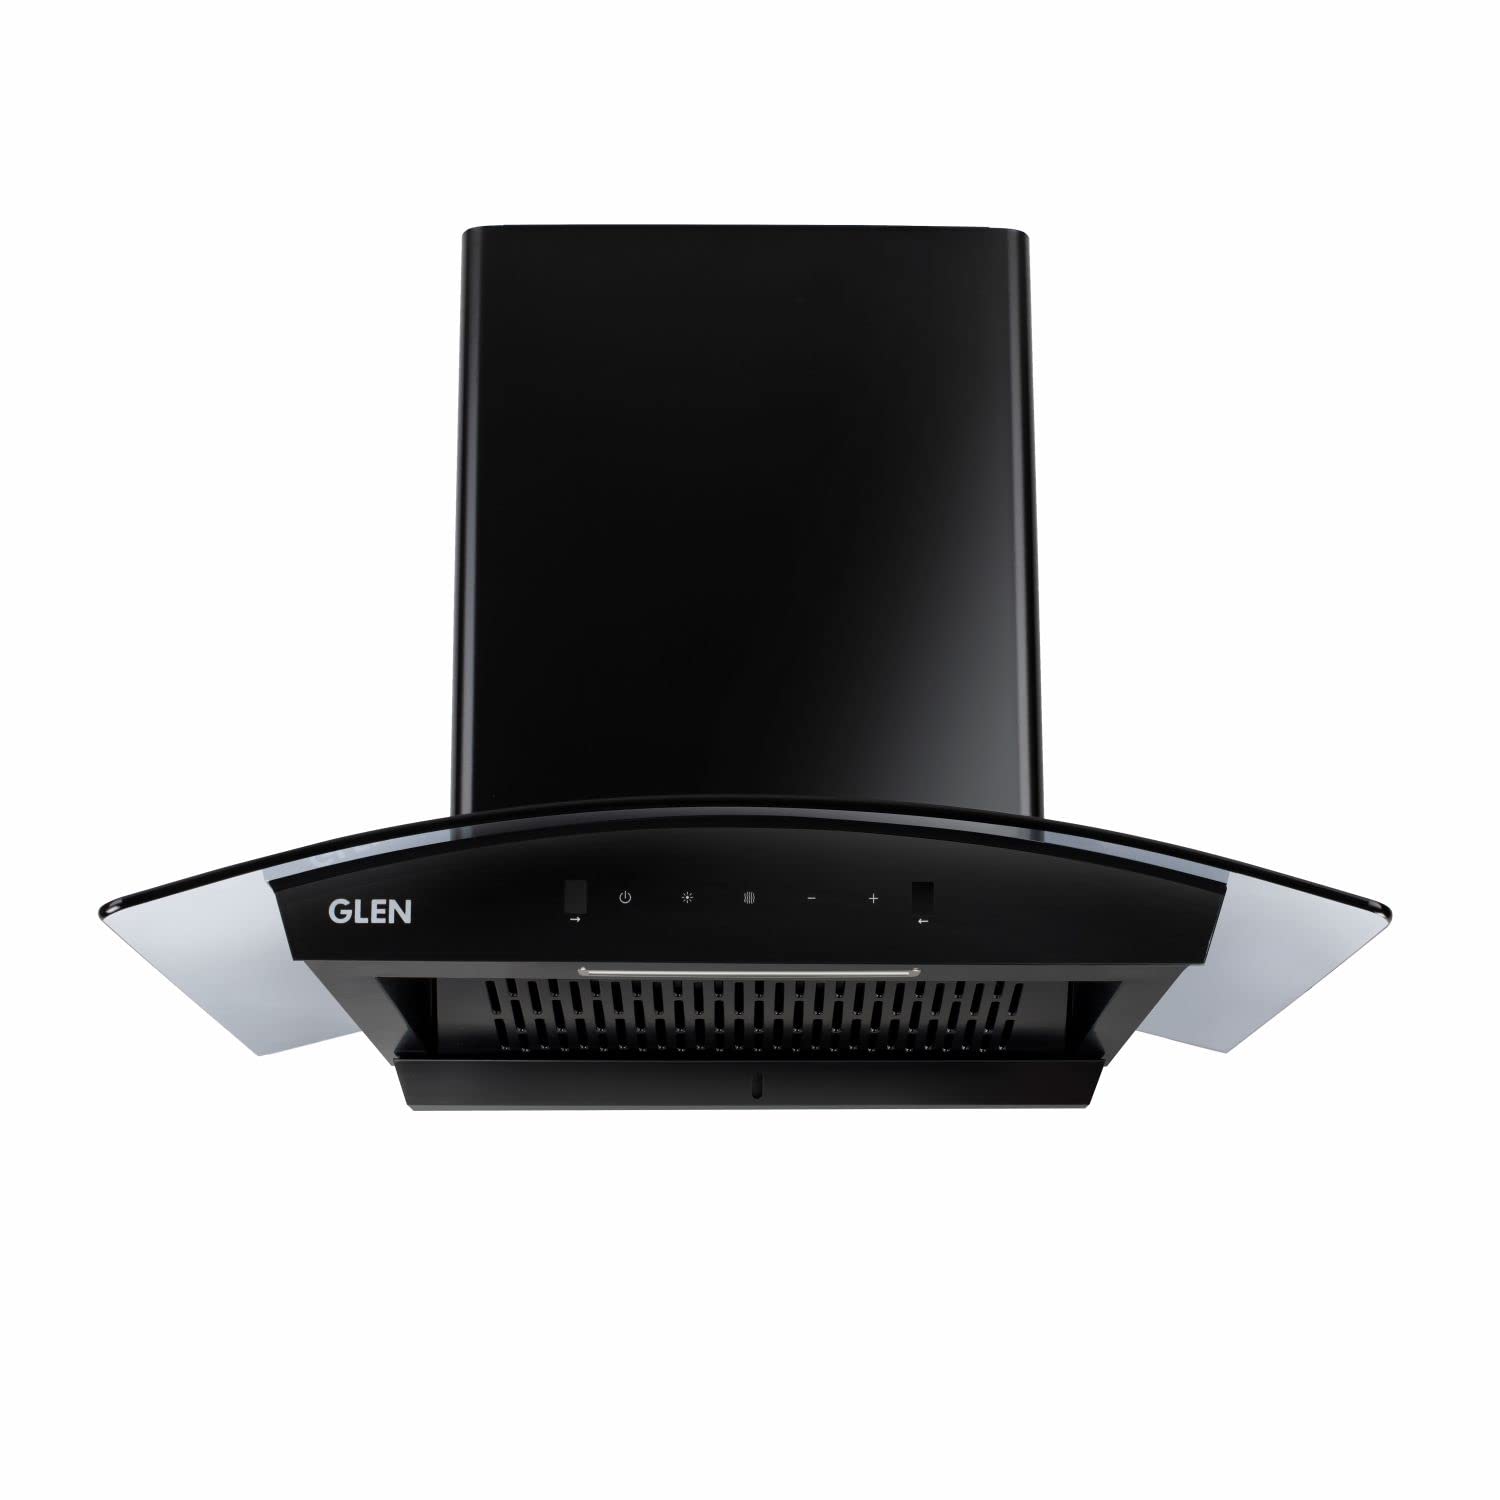 Glen Auto Clean Curved Glass Filter less Kitchen Chimney With 7 Year Warranty On Motor, with Motion Sensor 60cm, 1200 m3/h, Black (6058 BL Auto Clean)